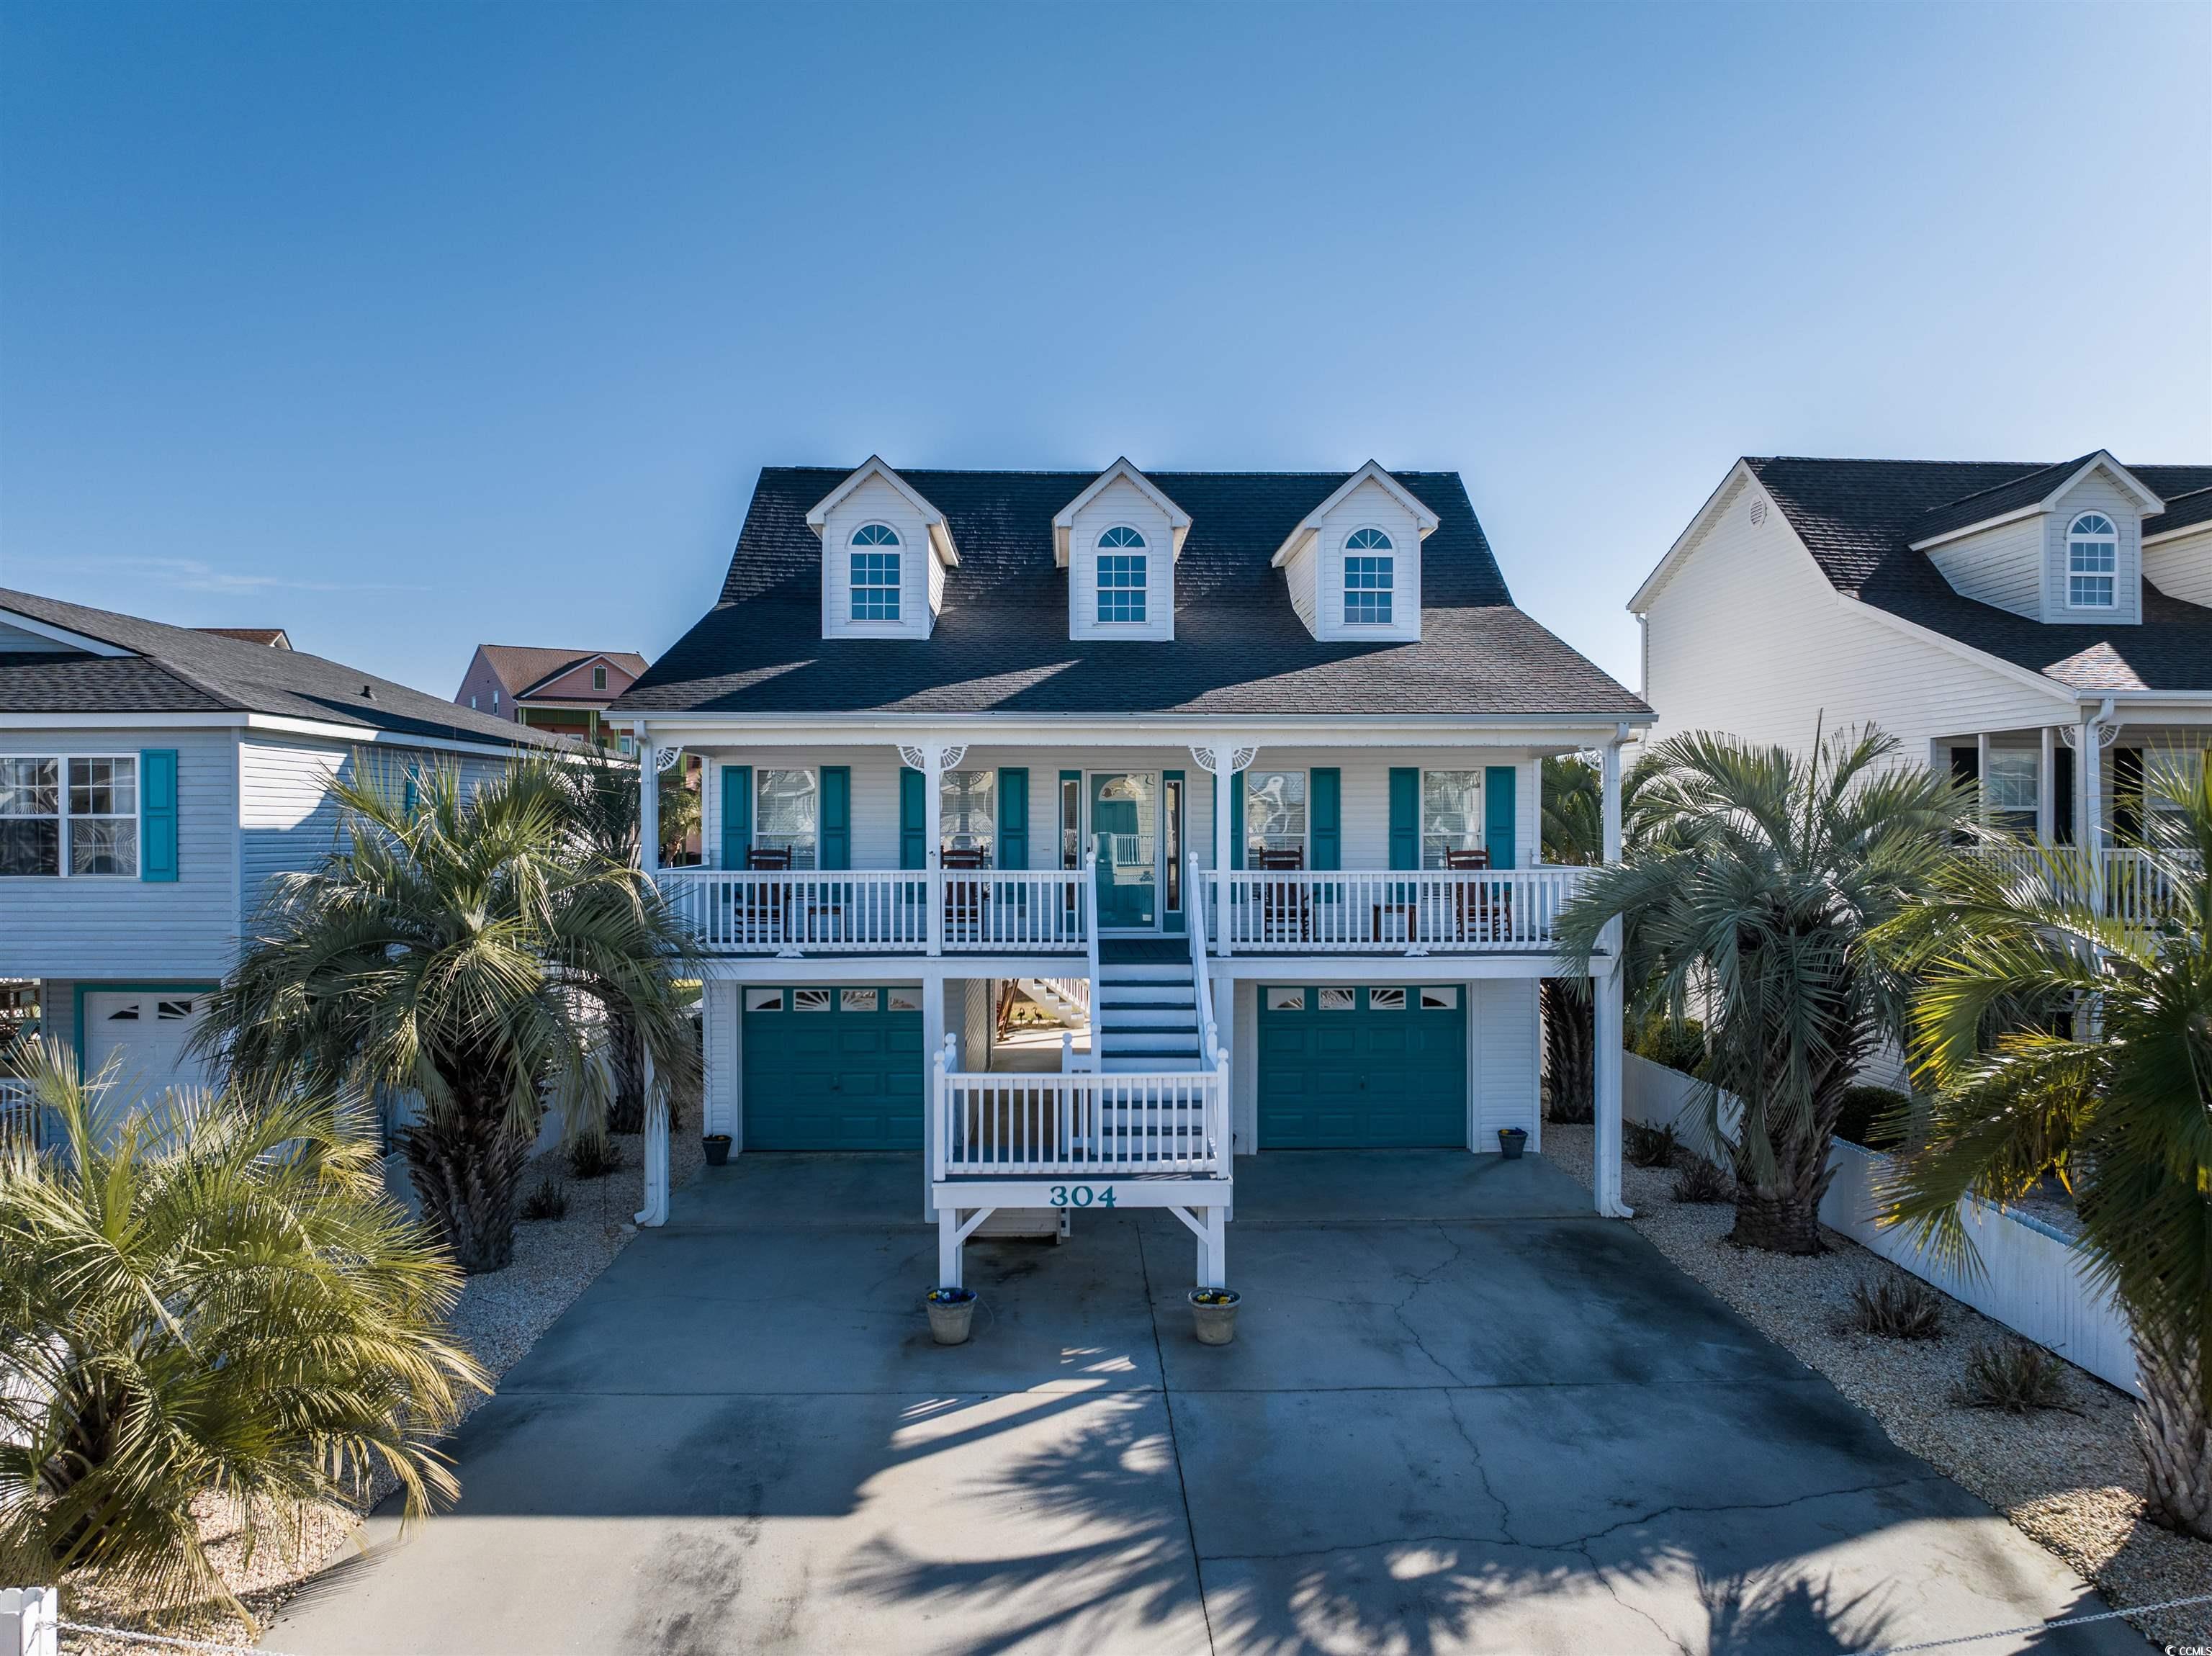 introducing the coastal paradise in cherry grove that you have been looking for. this 4 bedroom, 3 full and 2 half bath gem with fresh paint interior and exterior, is a custom built, one owner home offering comfort and style. the home with no dredge fees, view of the ocean and view of hog inlet, and has never been rented, is a rare find.  home features open concept connecting living area with high ceilings, dining and kitchen areas to allow space for entertaining or large families. granite countertops were installed in kitchen in 2023, new kitchen appliances in 2020, storage room appliances are 2022 washer, dryer and refrigerator. roof and ac unit was replaced in 2016. large master ensuite with his and hers closets, double vanity, garden tub and linen closet. the windows are adorned with custom 2" wood blinds. step out to the spacious screened in porch and relax as you enjoy the sea breeze. the beautiful oak stairway leads up stairs to three bedrooms (owner currently using one for storage) and two full baths.   step out on rear balcony upstairs for a view of the ocean, inlet or the beauty of your own backyard.  there is plenty of room to install your own private swimming pool in the rear. if you are looking for lots of storage, this home has a 14'x21' storage with a 9' remote garage door and a second 10'x21' storage area with 8' remote garage door. the concrete driveway and lot border is accented with fencing and decorative rocks to minimize yard maintenance.  the lush landscape is equipped with a 3-zone water sprinkler and a seperate meter. after a day on the beach, just a short golf cart ride away, you will enjoy the convenience of the enclosed outdoor shower with hot and cold water to wash the sand away before retiring to your oaisis by the sea.this home offers incredible opportunities whether you are looking for a primary residence, an investment property, or just a place for you and your family to get away to the beach and start making memories to last a lifetime. this amazing property is siuated far enough away from the crowds to allow the privacy that you desire while also only a short ride to the ammenities of the grand strand including shopping, restaurants, entertainment, etc. call today to schedule your viewing of this property you can call your home at the beach.all measurments are approximate and must be verified by buyer and/or buyer agent.